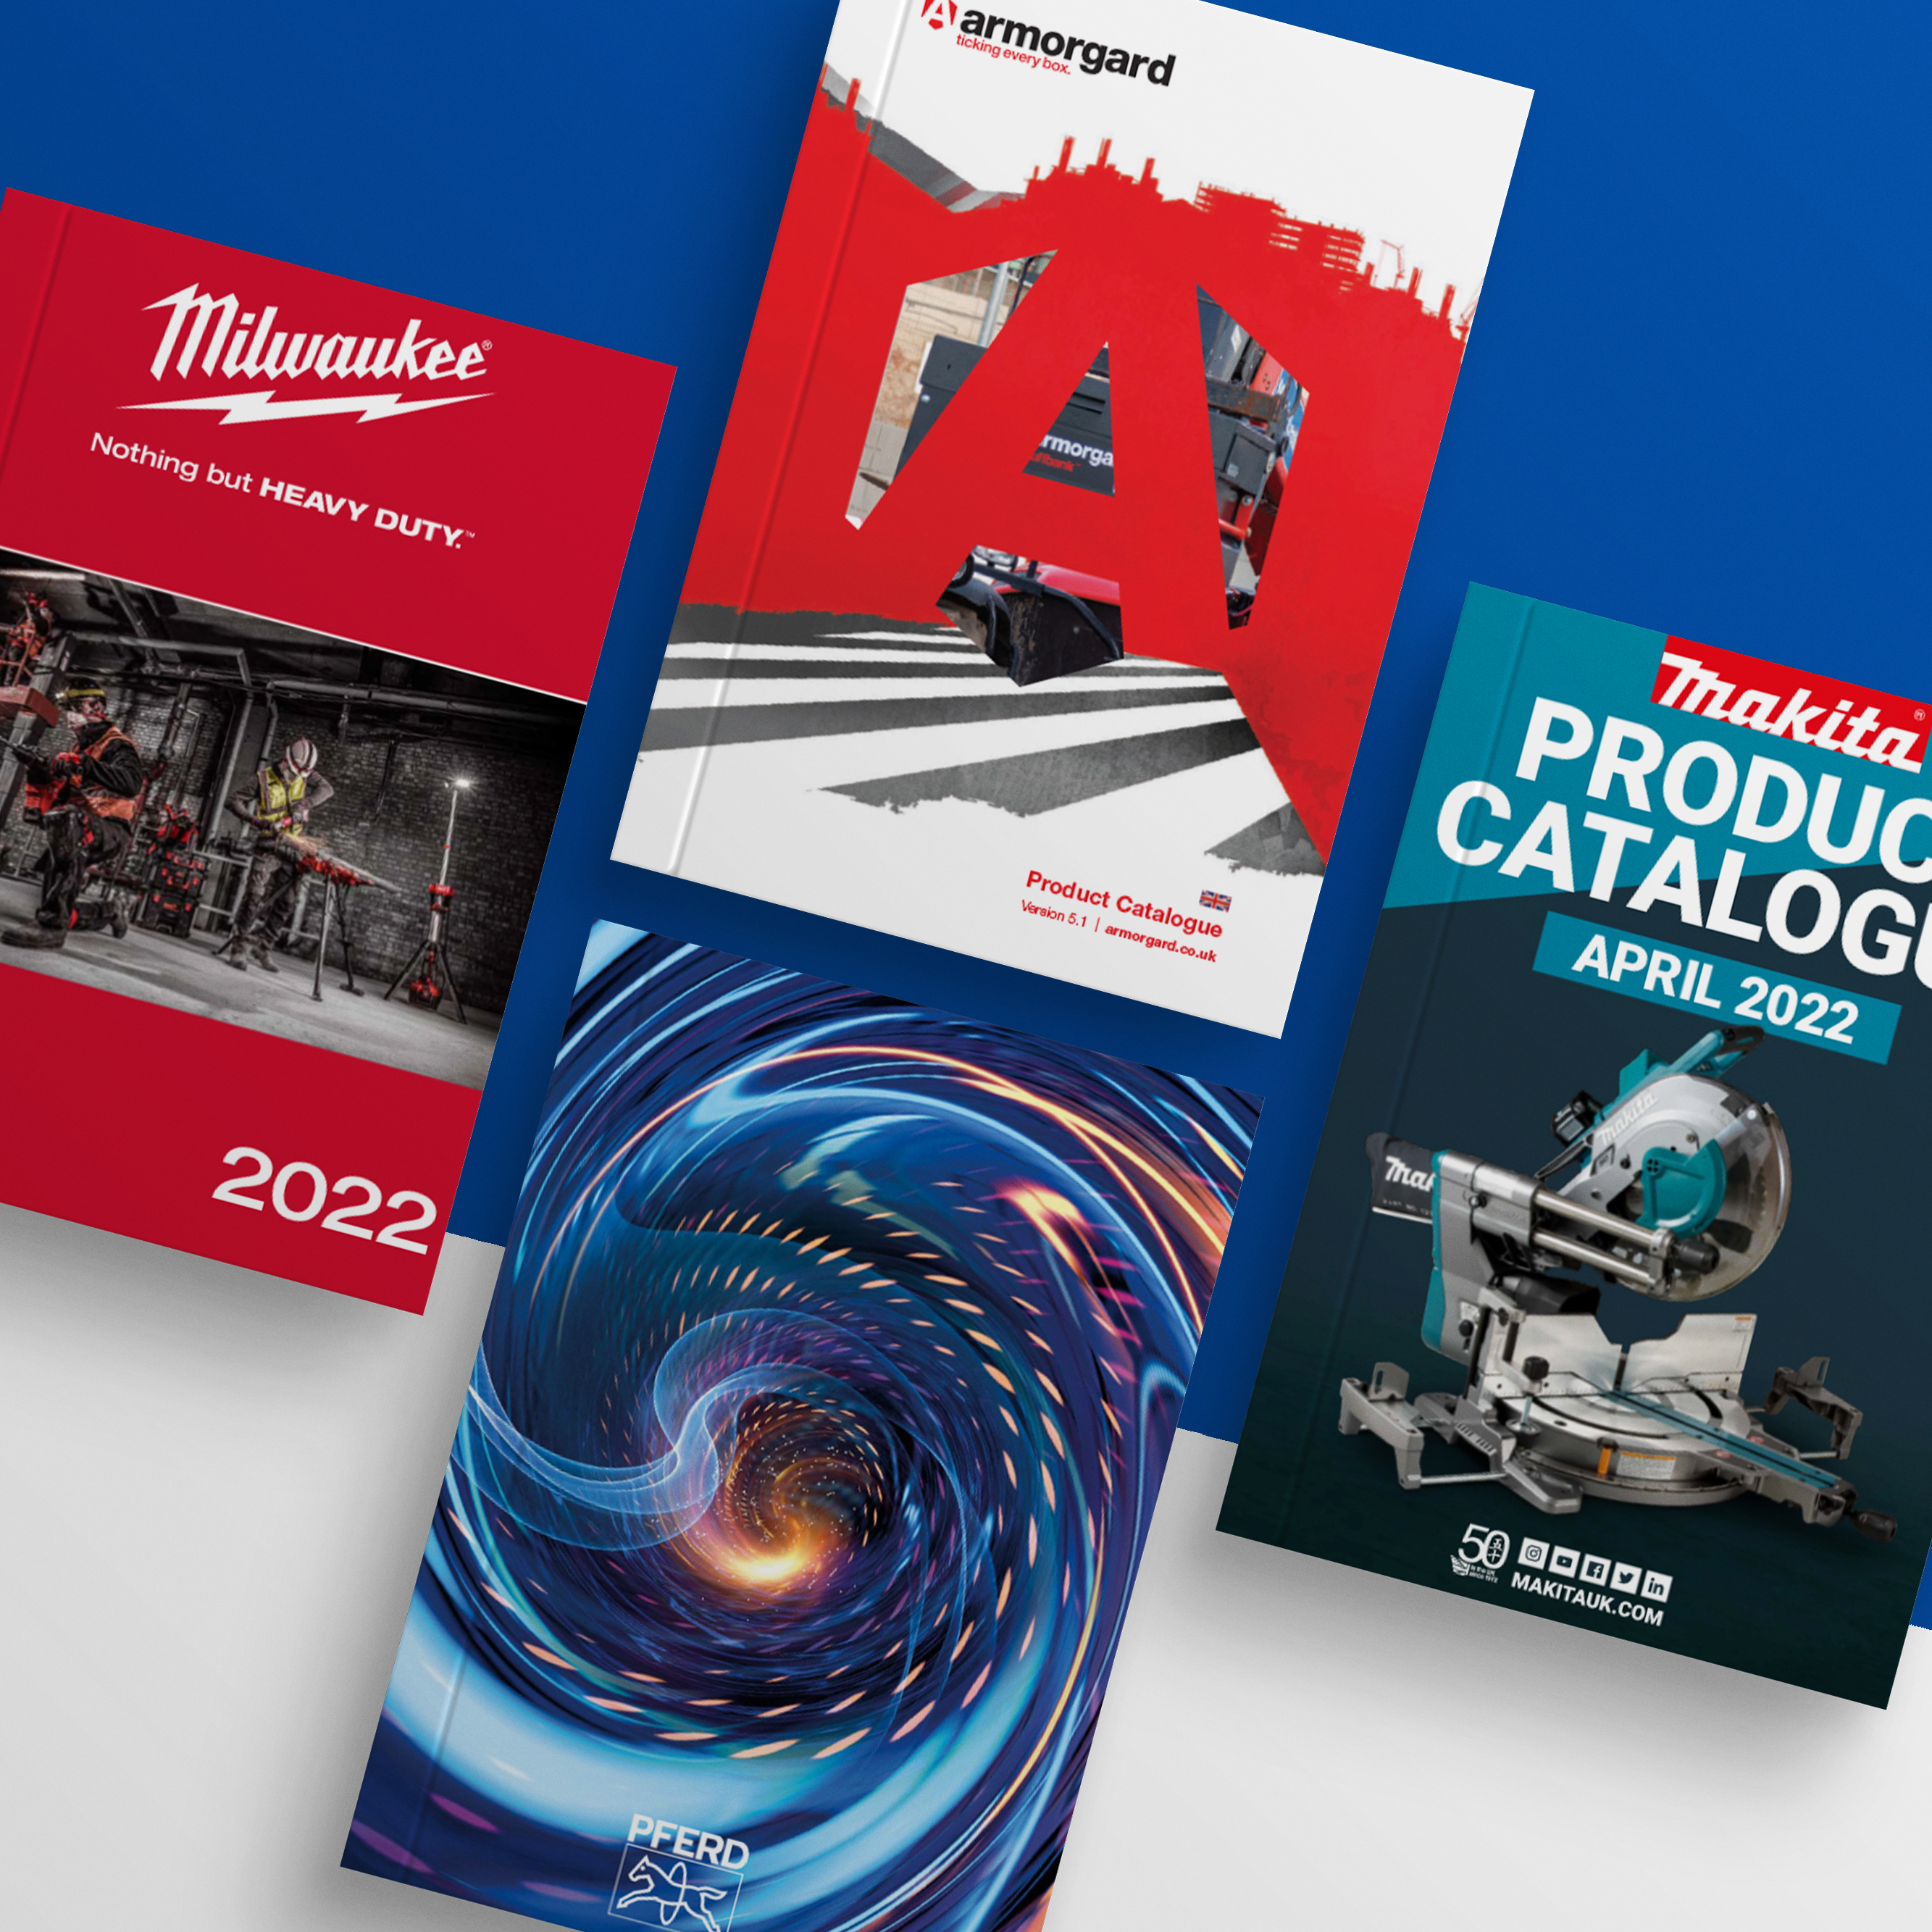 Supplier Catalogues